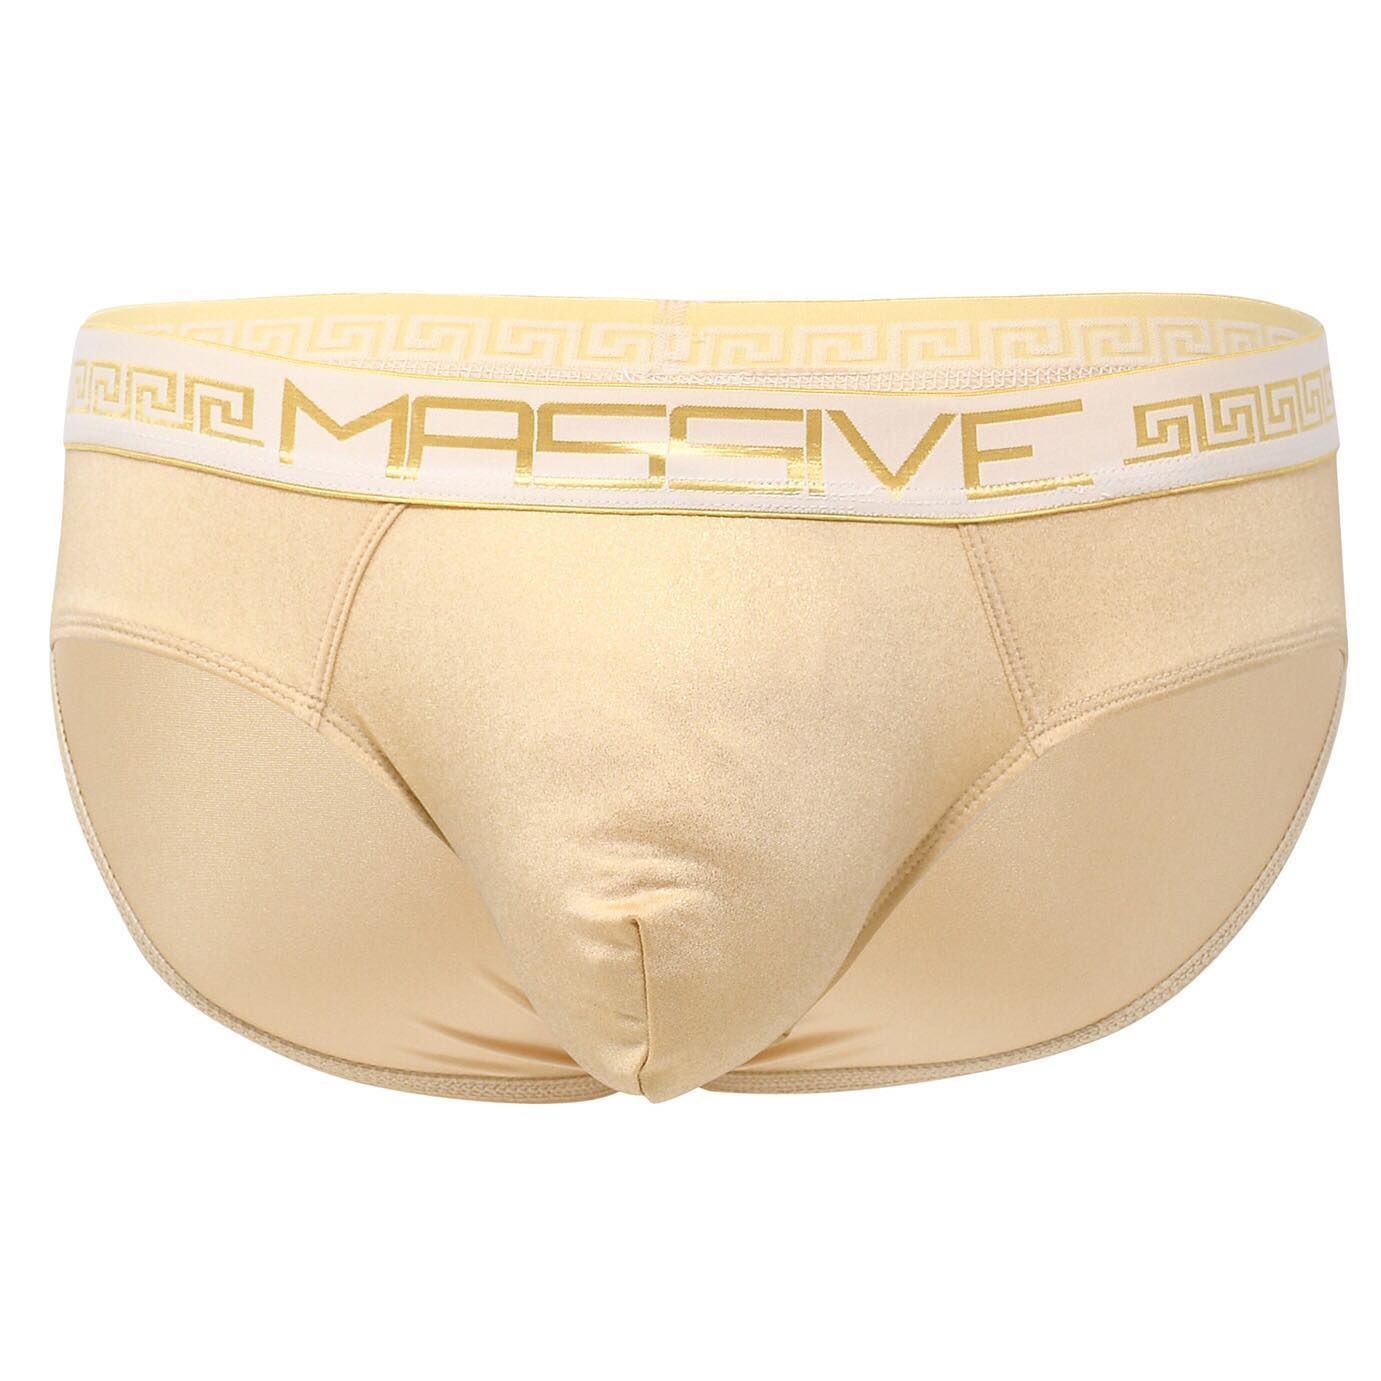 New Arrivals! The Massive Nude Briefs from Andrew Christian is a titillating and luxurious new underwear design featuring a shiny polyamide blend fabric and golden greek key pattern detailing:
_____
https://menandunderwear.com/shop/underwear/andrew-christian-massive-nude-briefs